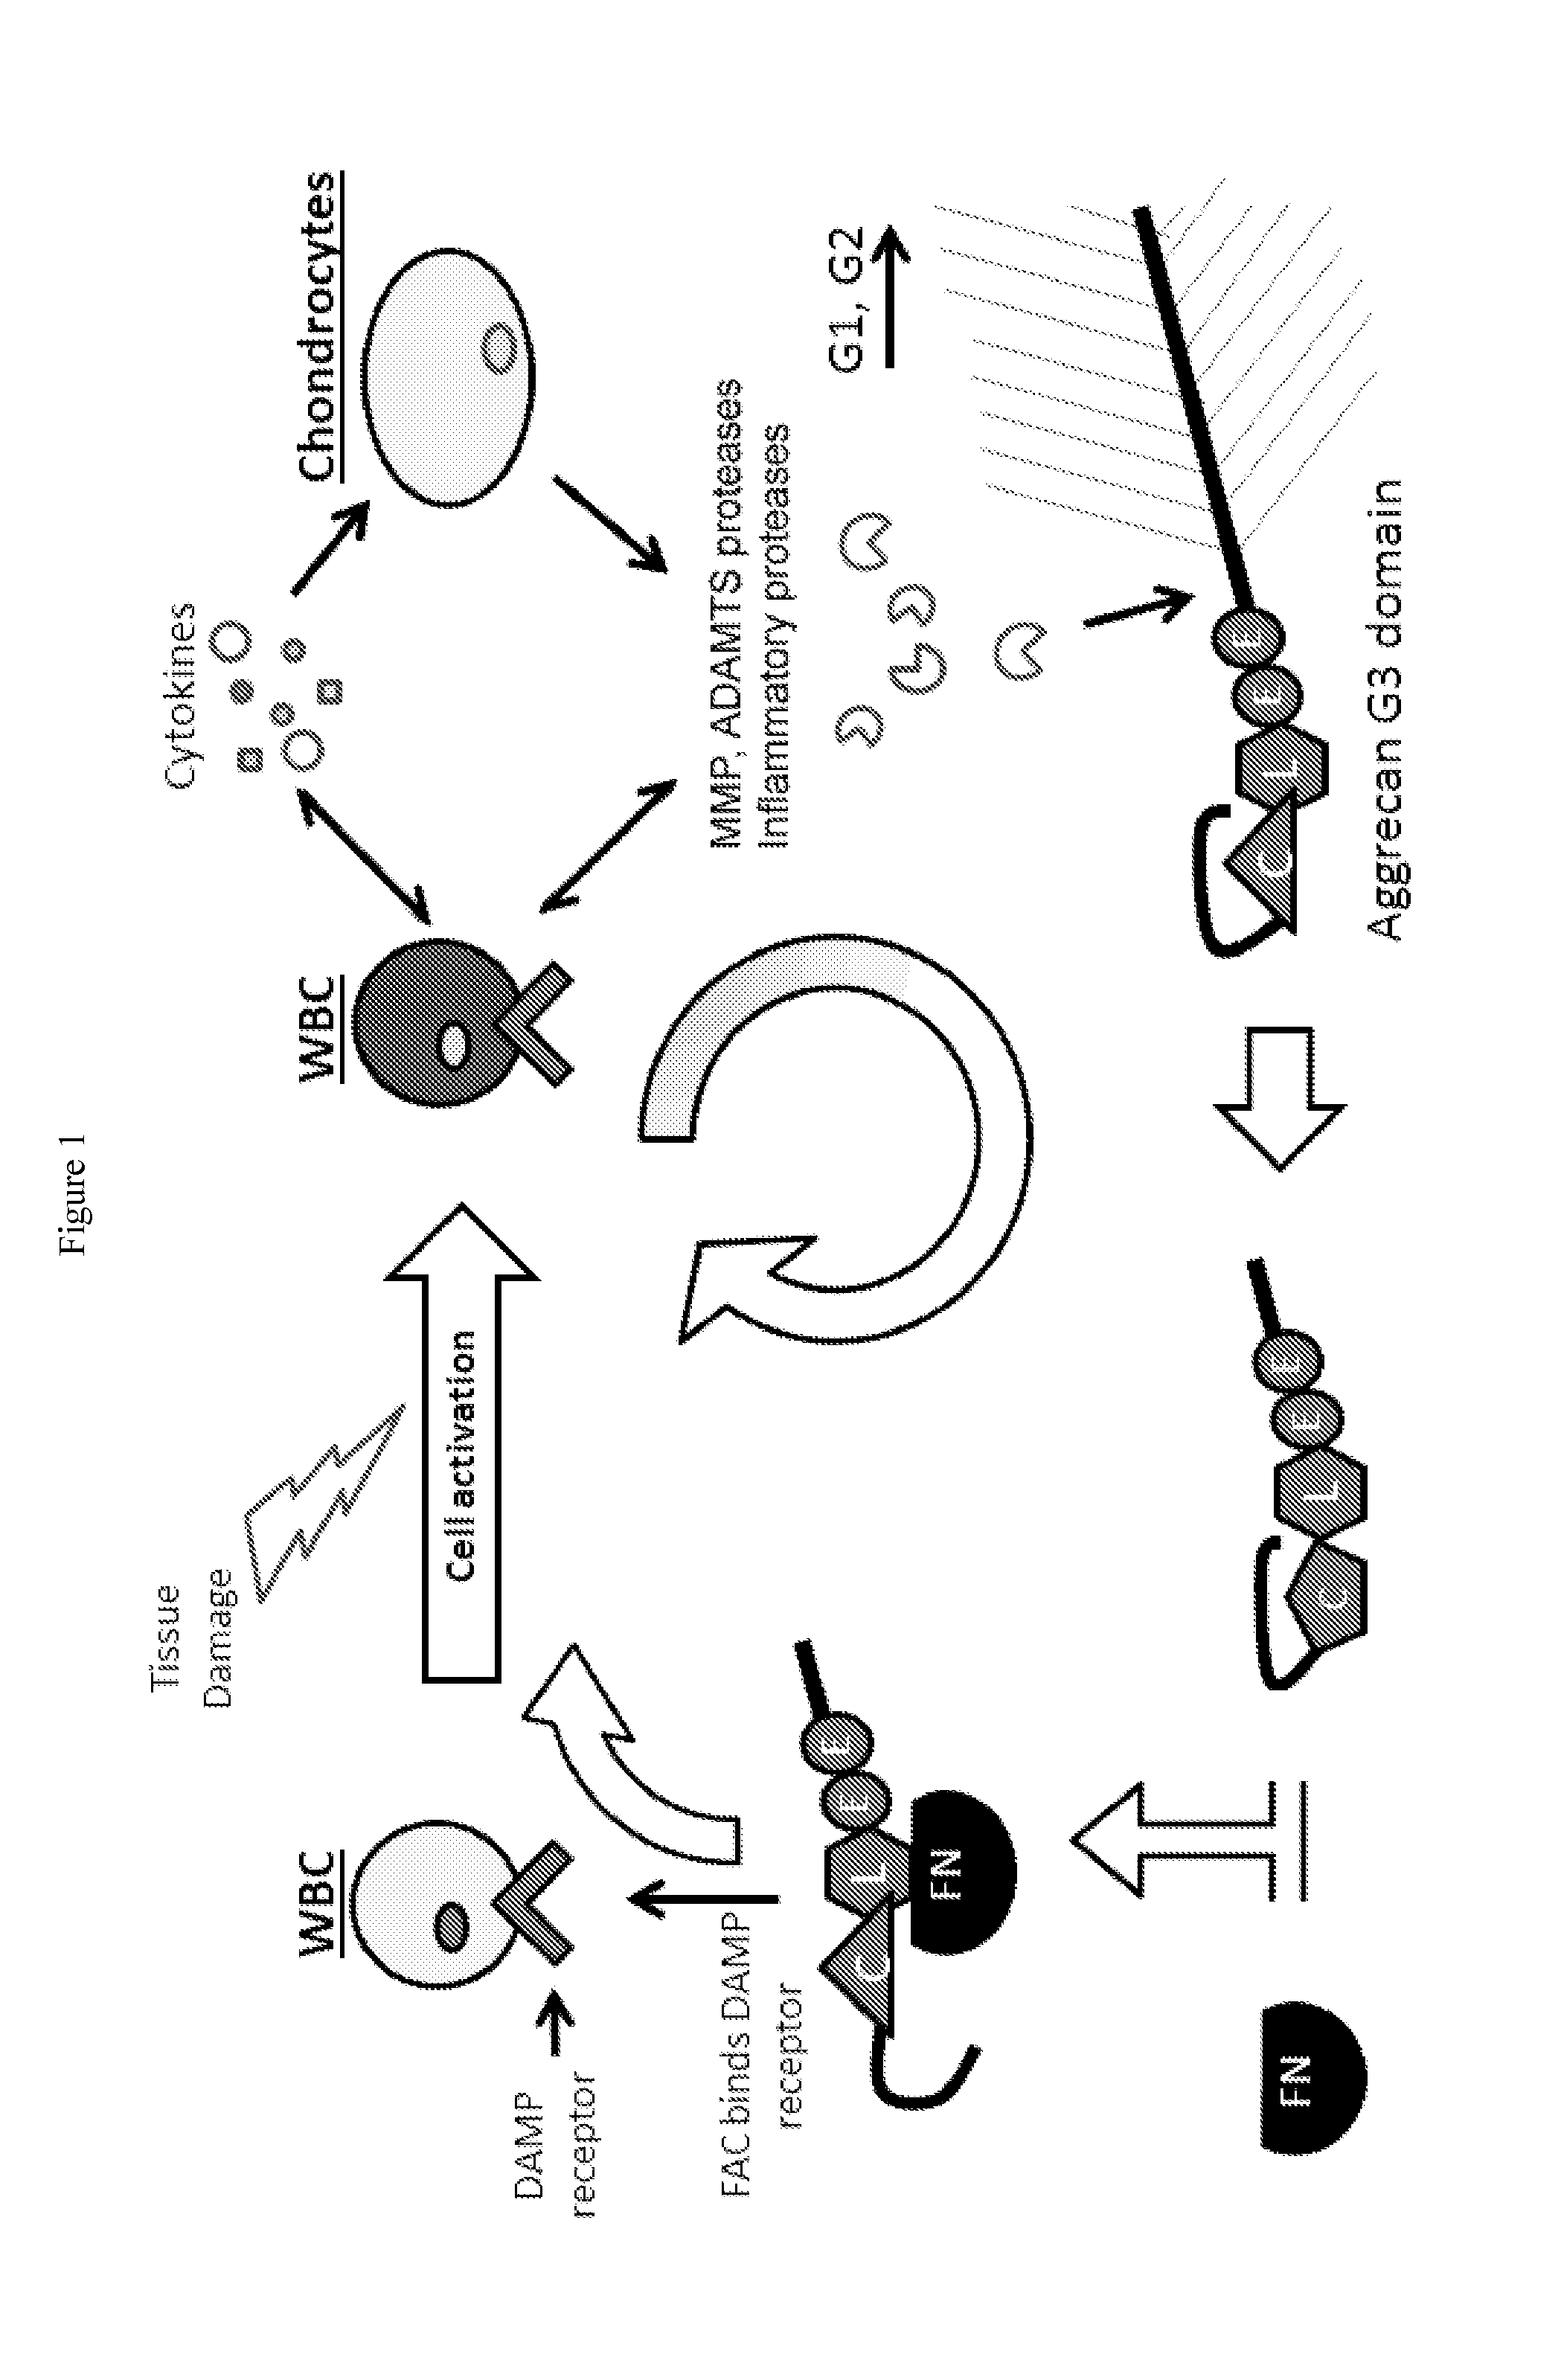 Systems, compositions, and methods for transplantation